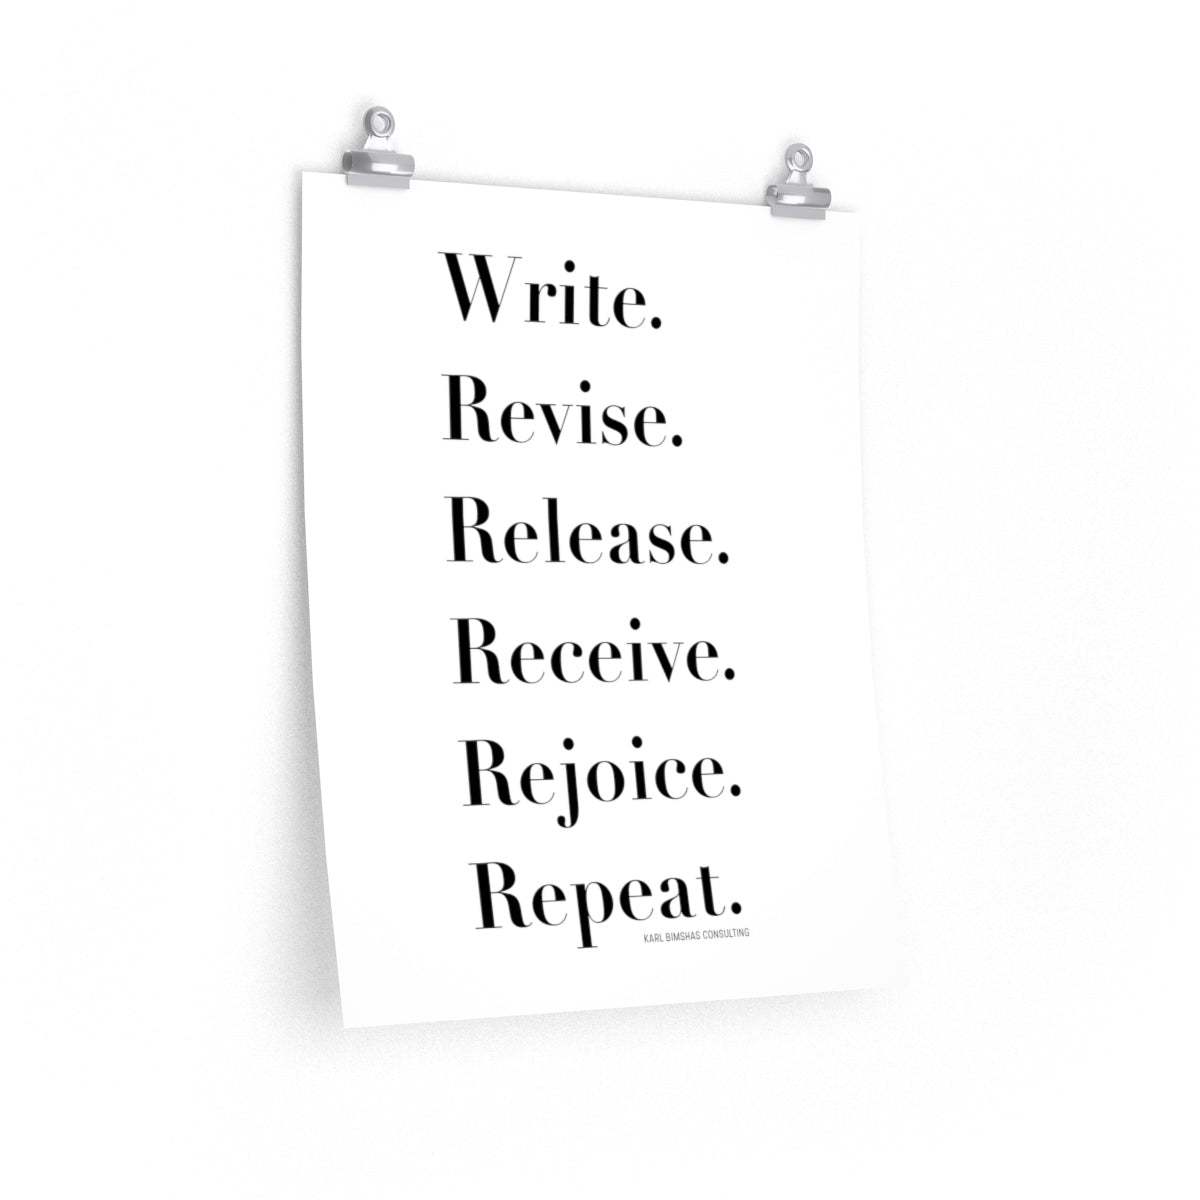 Six Words of Advice for Writers - 16x20 poster